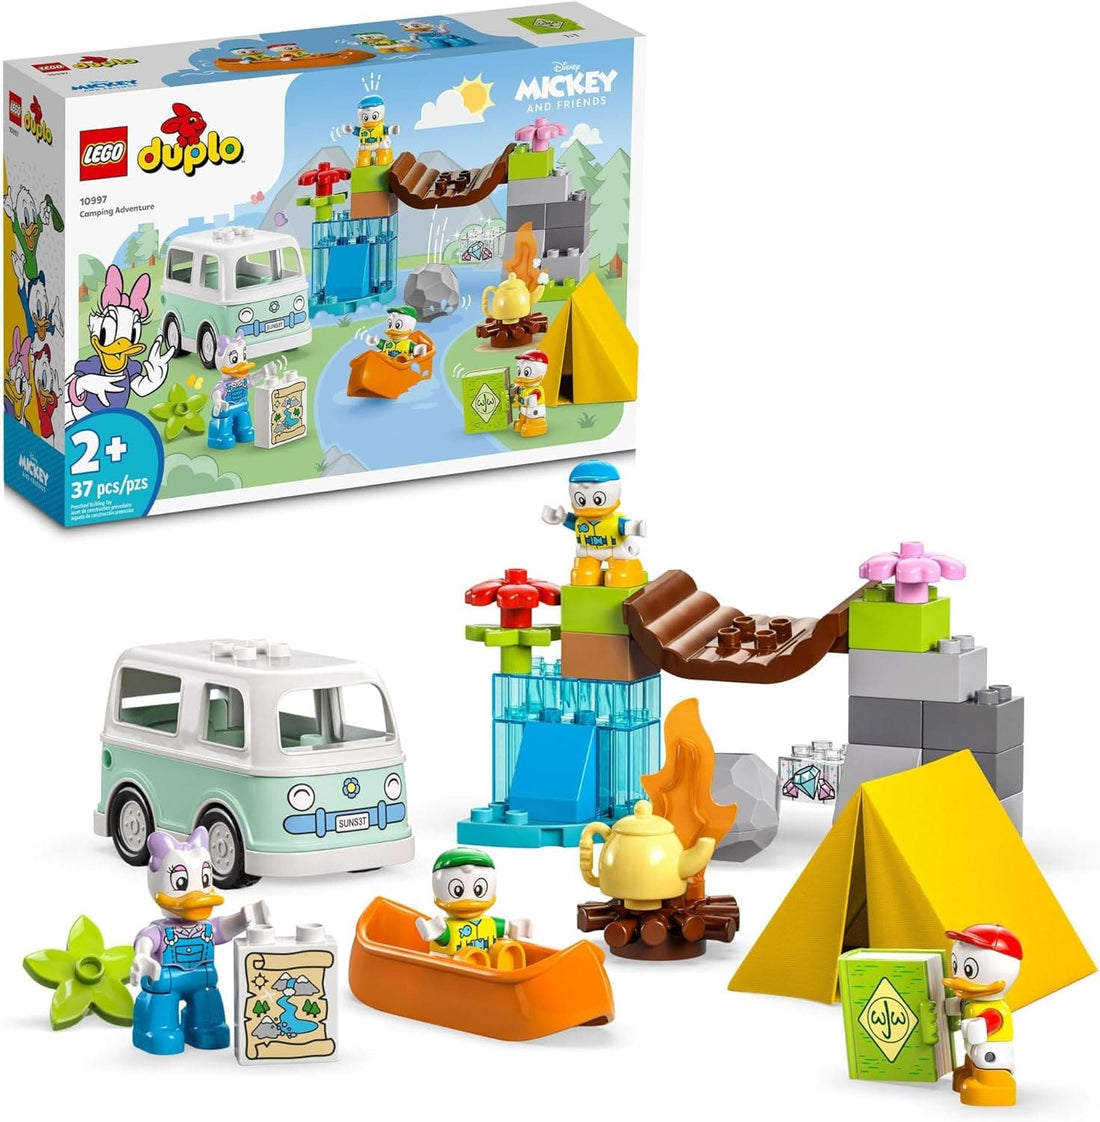 LEGO DUPLO Disney Mickey and Friends Camping Adventure Features 4 DUPLO Toy Figures: Daisy Duck, Huey, Dewey and Louie - best price from Maltashopper.com 10997